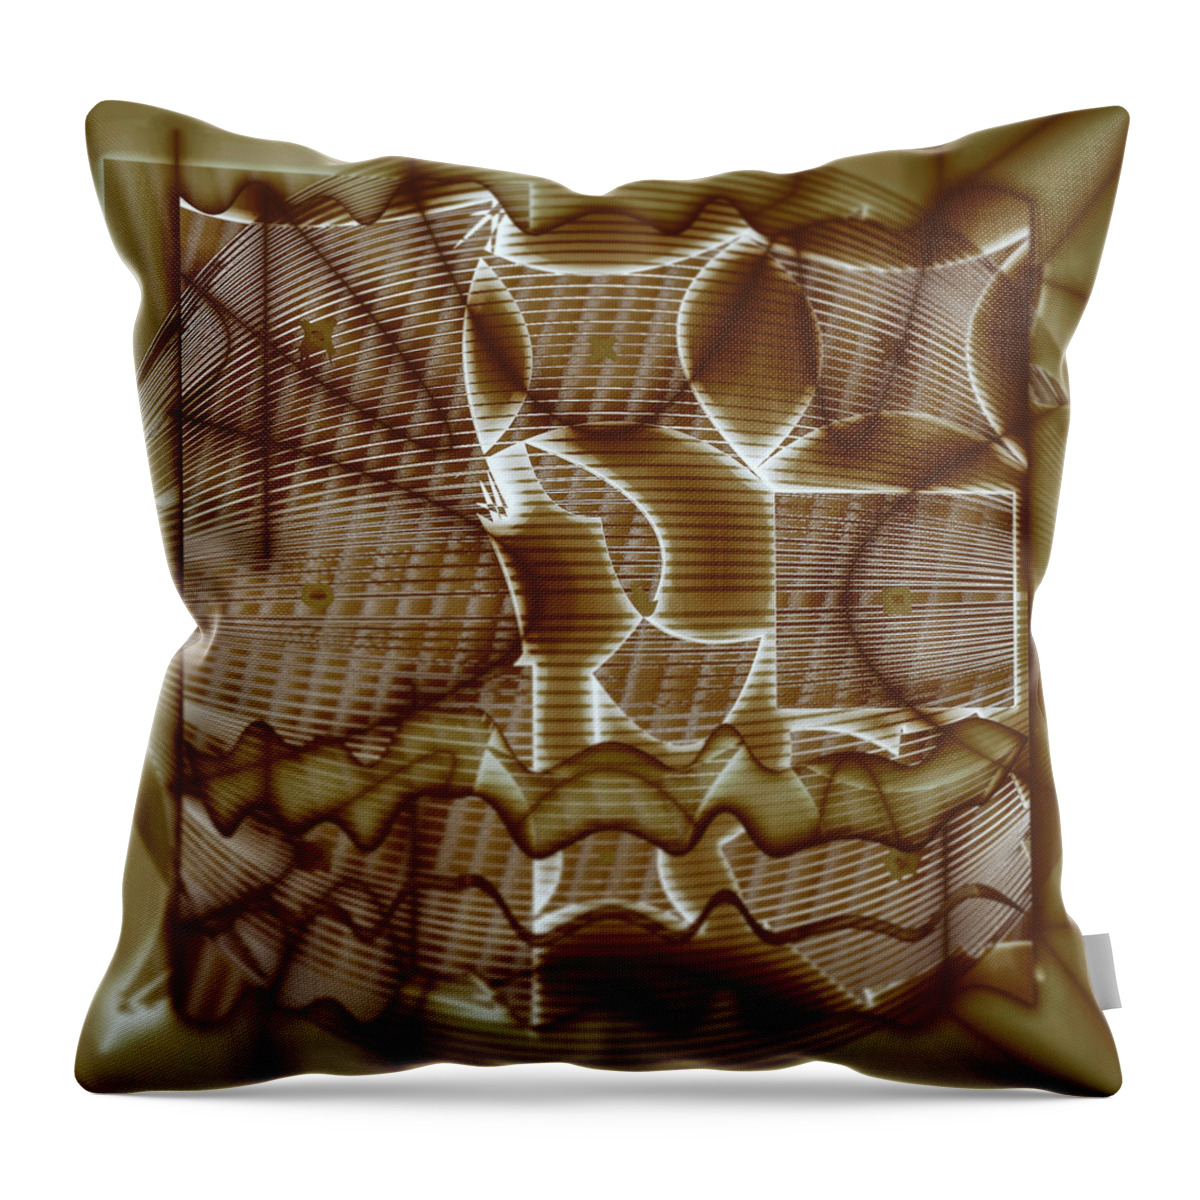 Abstract Throw Pillow featuring the digital art Pattern 28 #1 by Marko Sabotin